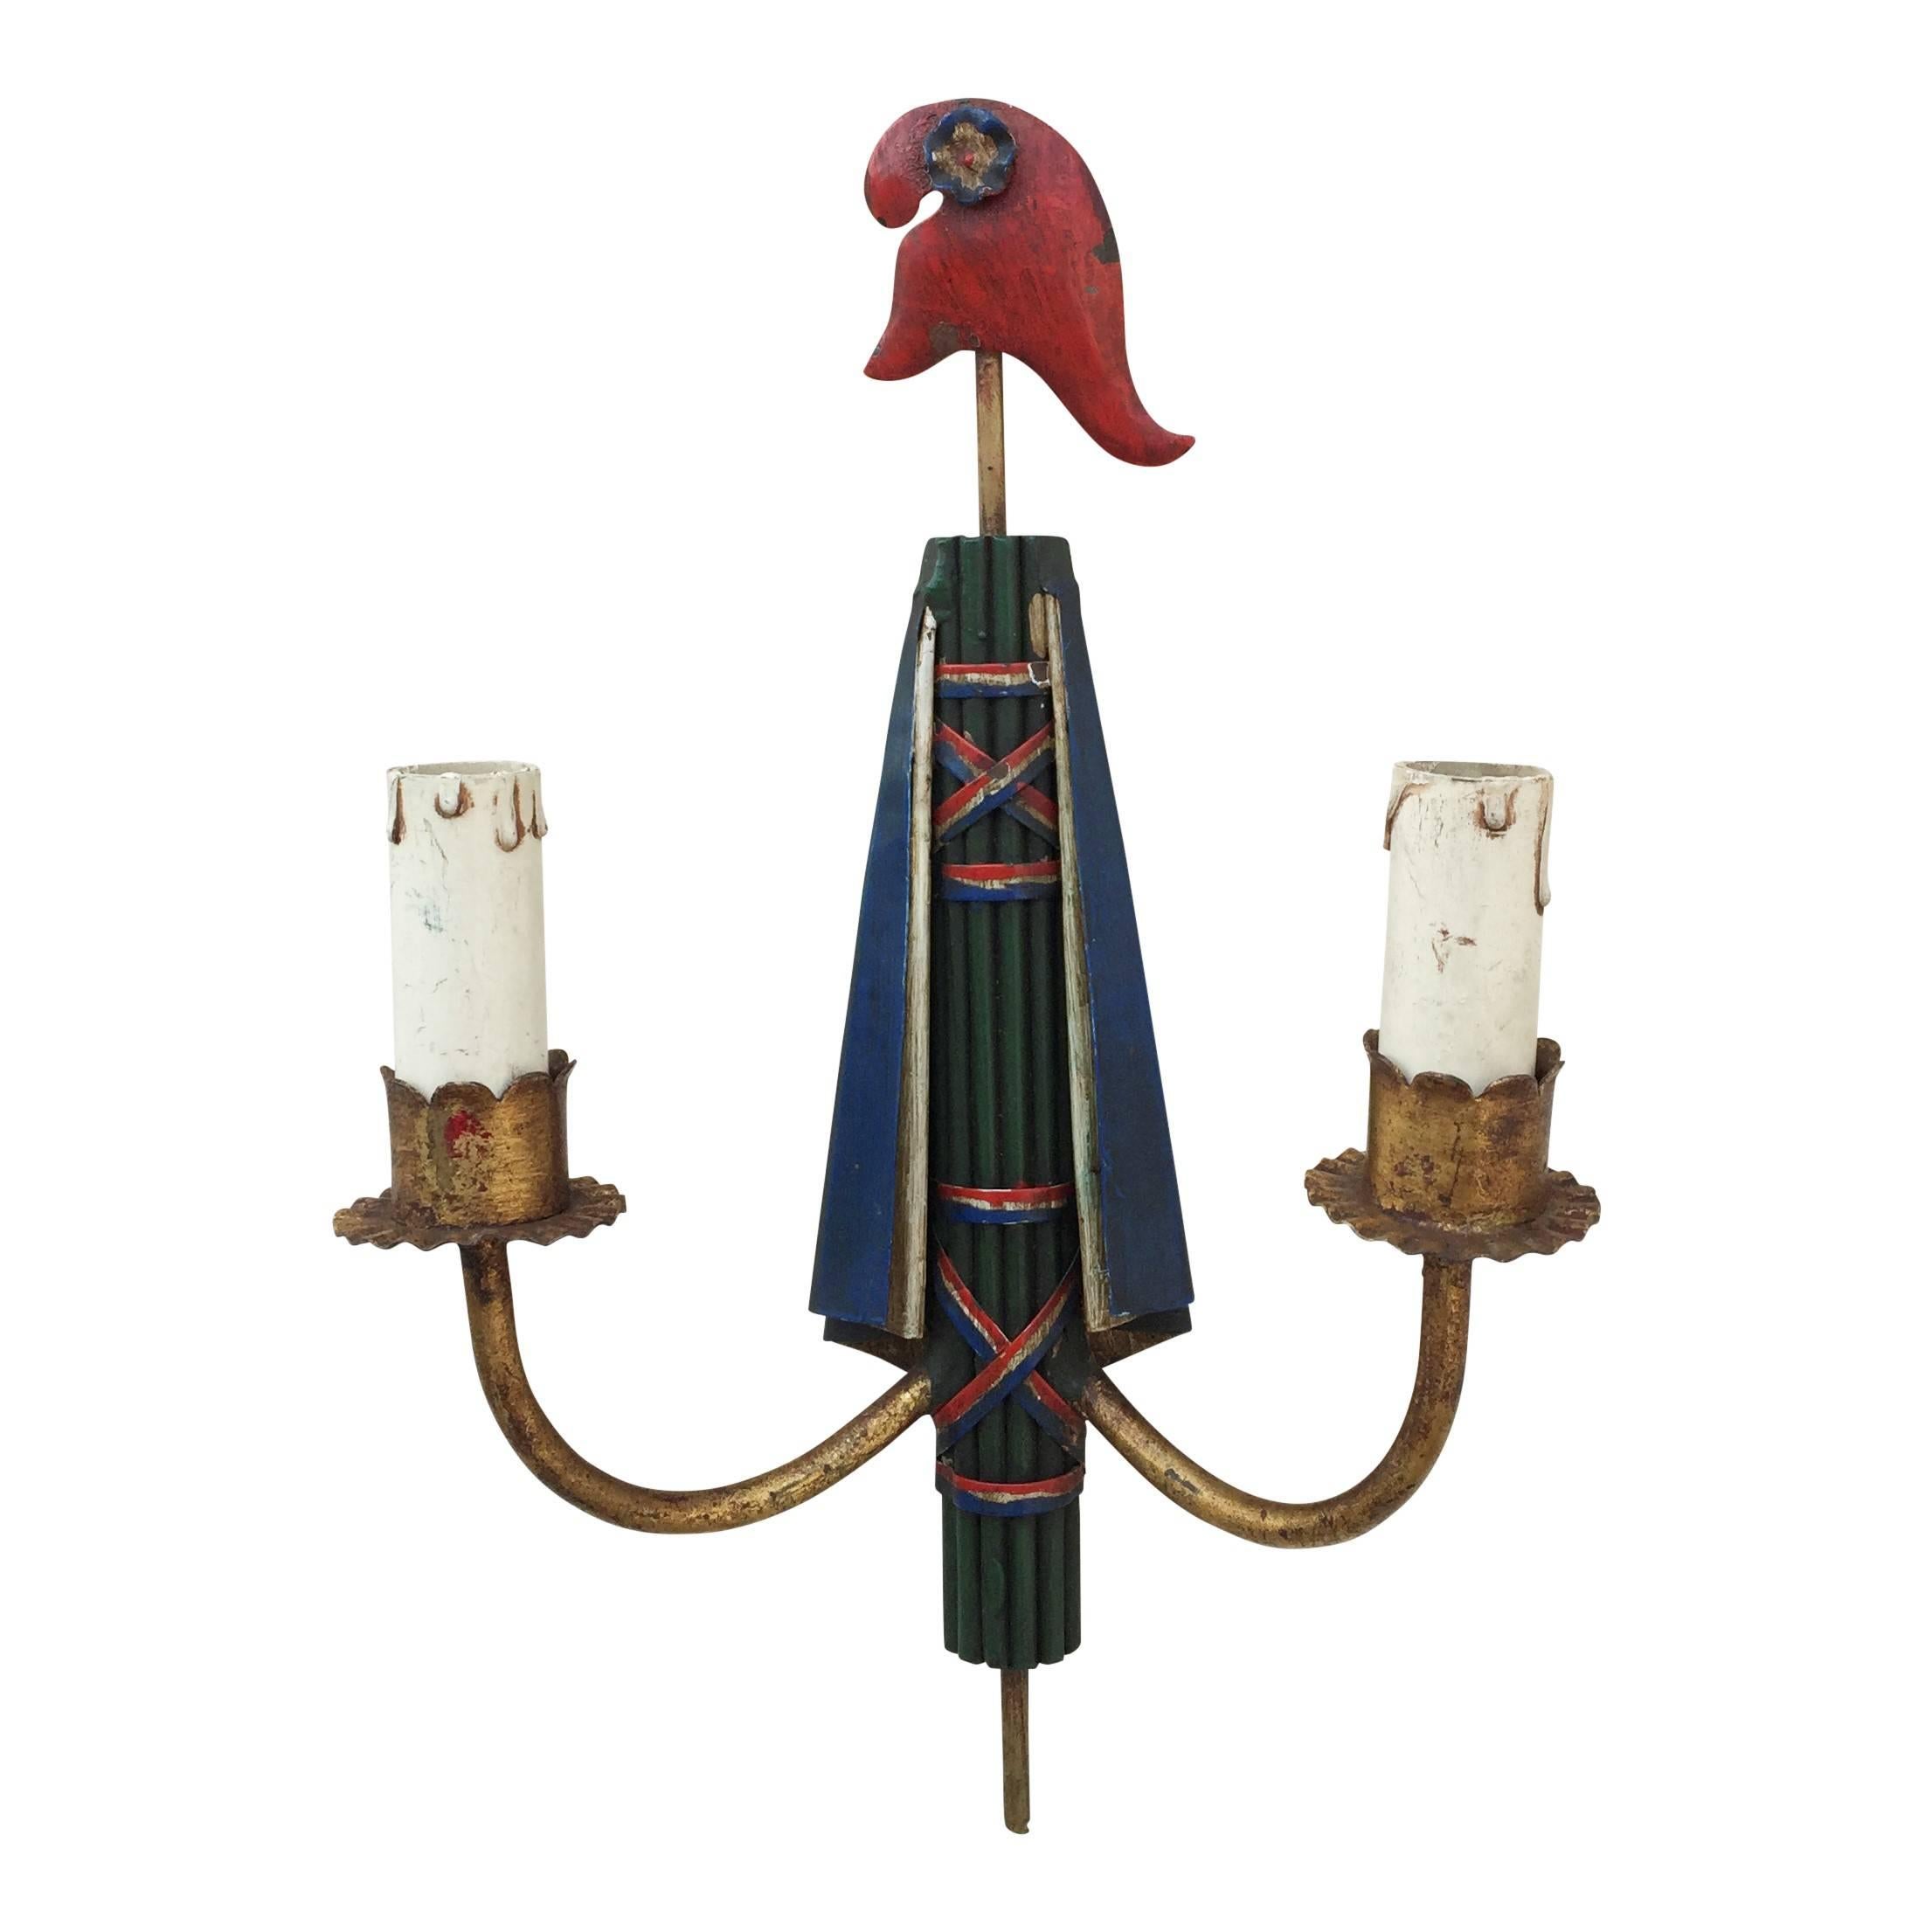 Painted plied tole
represents emblema of French Revolution 
double arm sconces.
Two pairs available.
European socket and wiring
the second pair will ship from France.
Price does not include handling, shipping and possible customs related